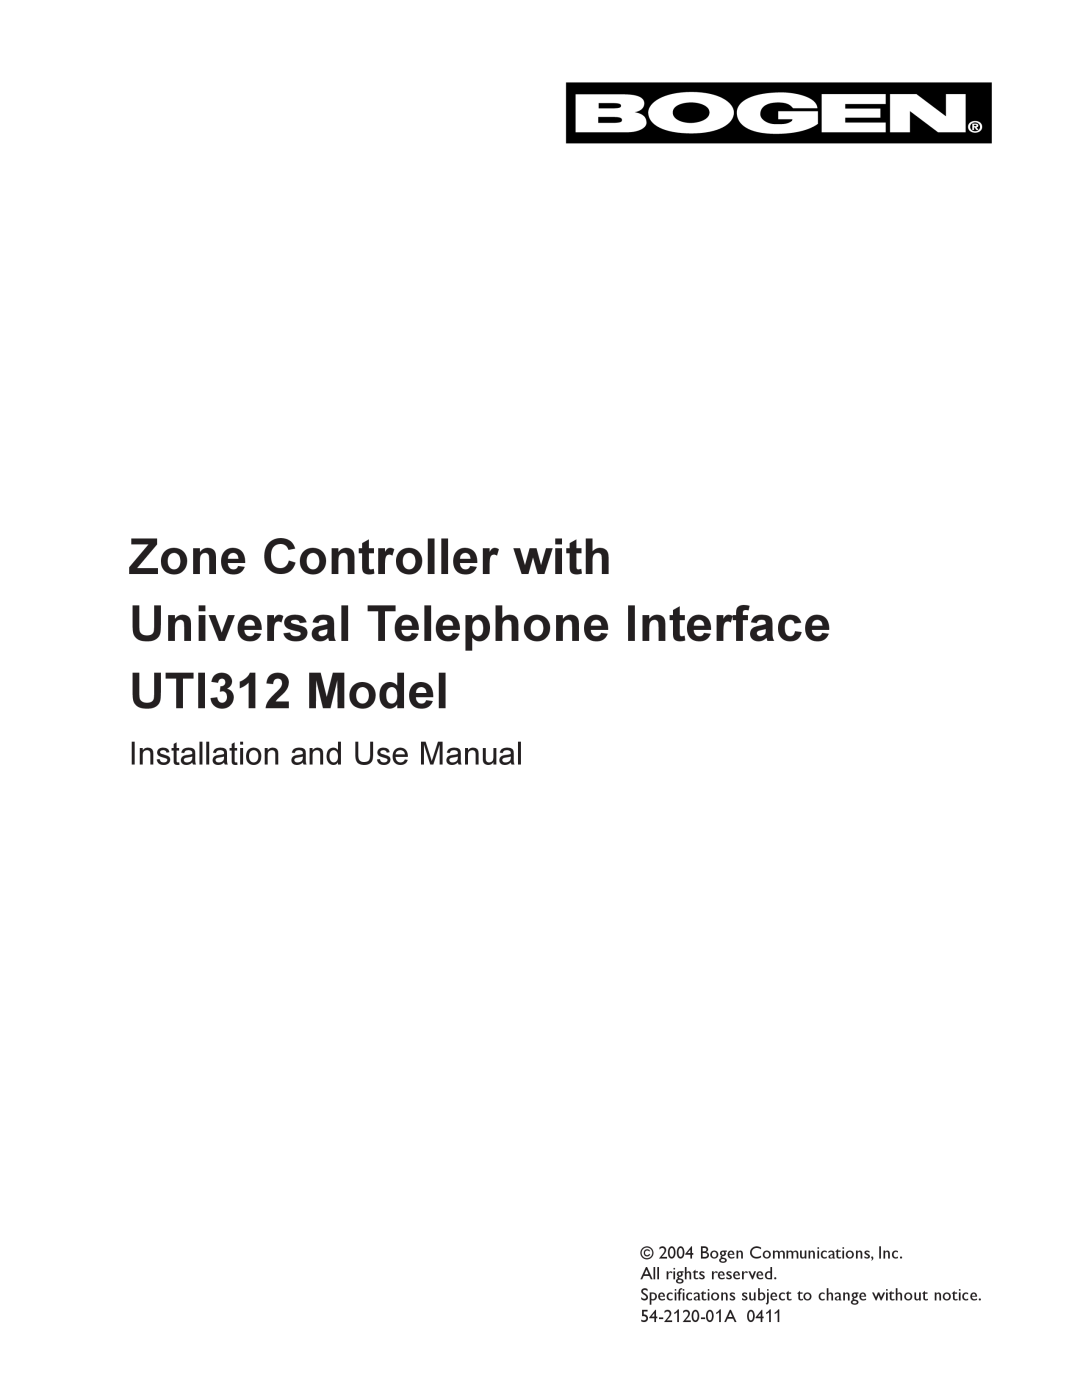 Bogen specifications Zone Controller with Universal Telephone Interface UTI312 Model, Installation and Use Manual 